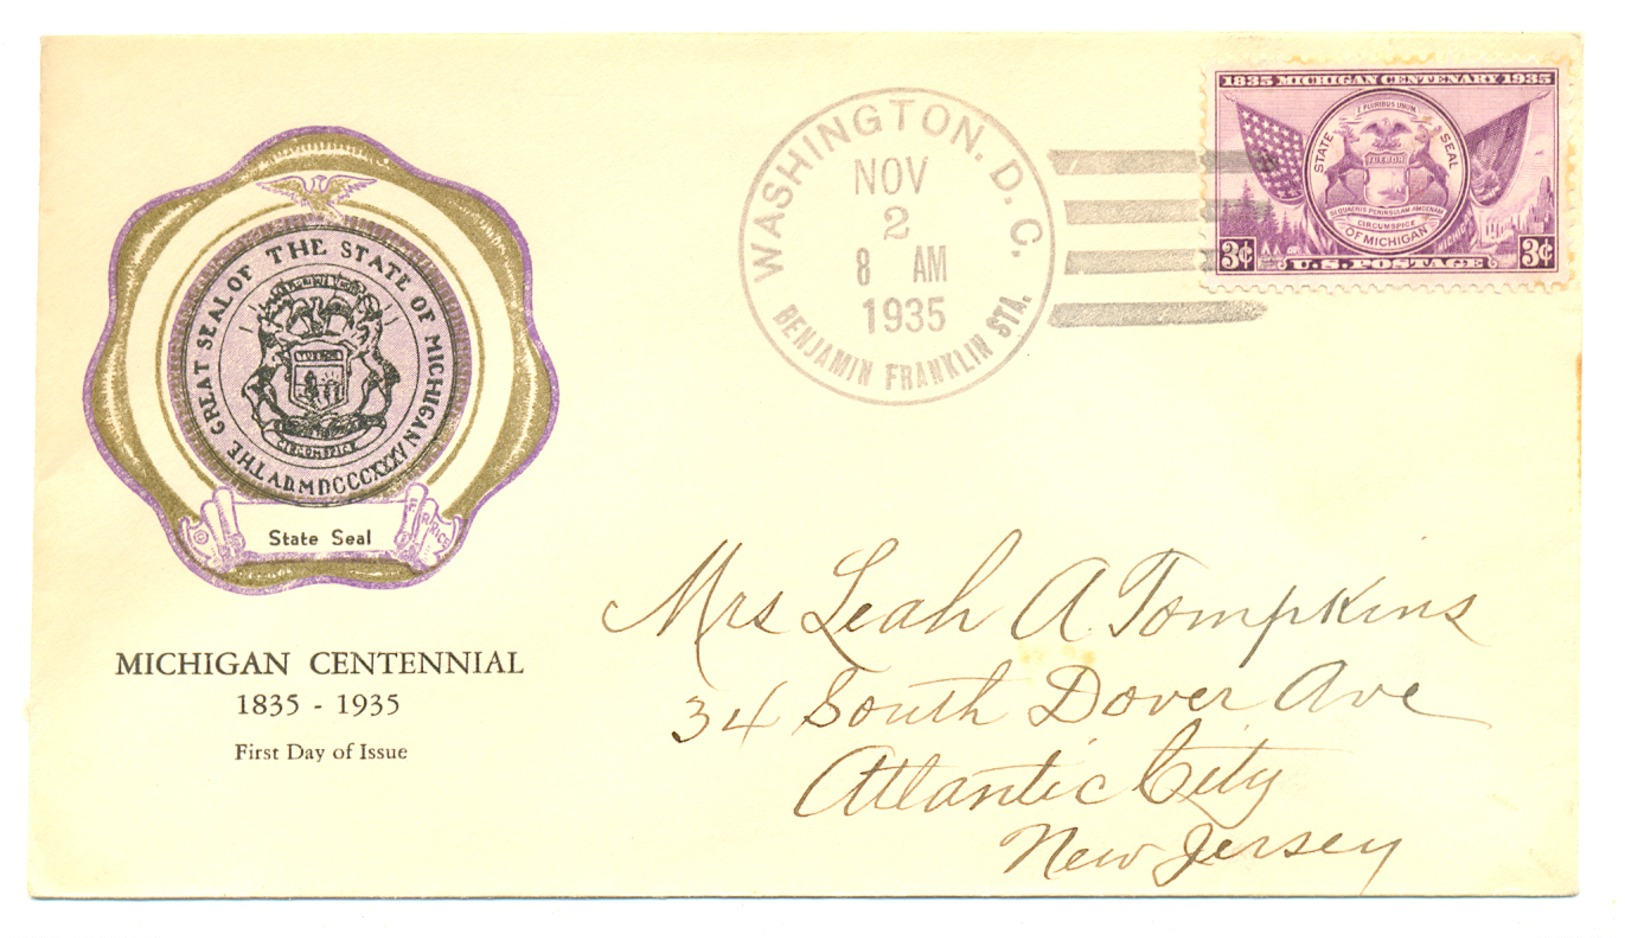 USA DC WASHINGTON TO NJ 1935 FIRST DAY COVER 43117 SC 775 MICHIGAN STATE SEAL - Poststempel